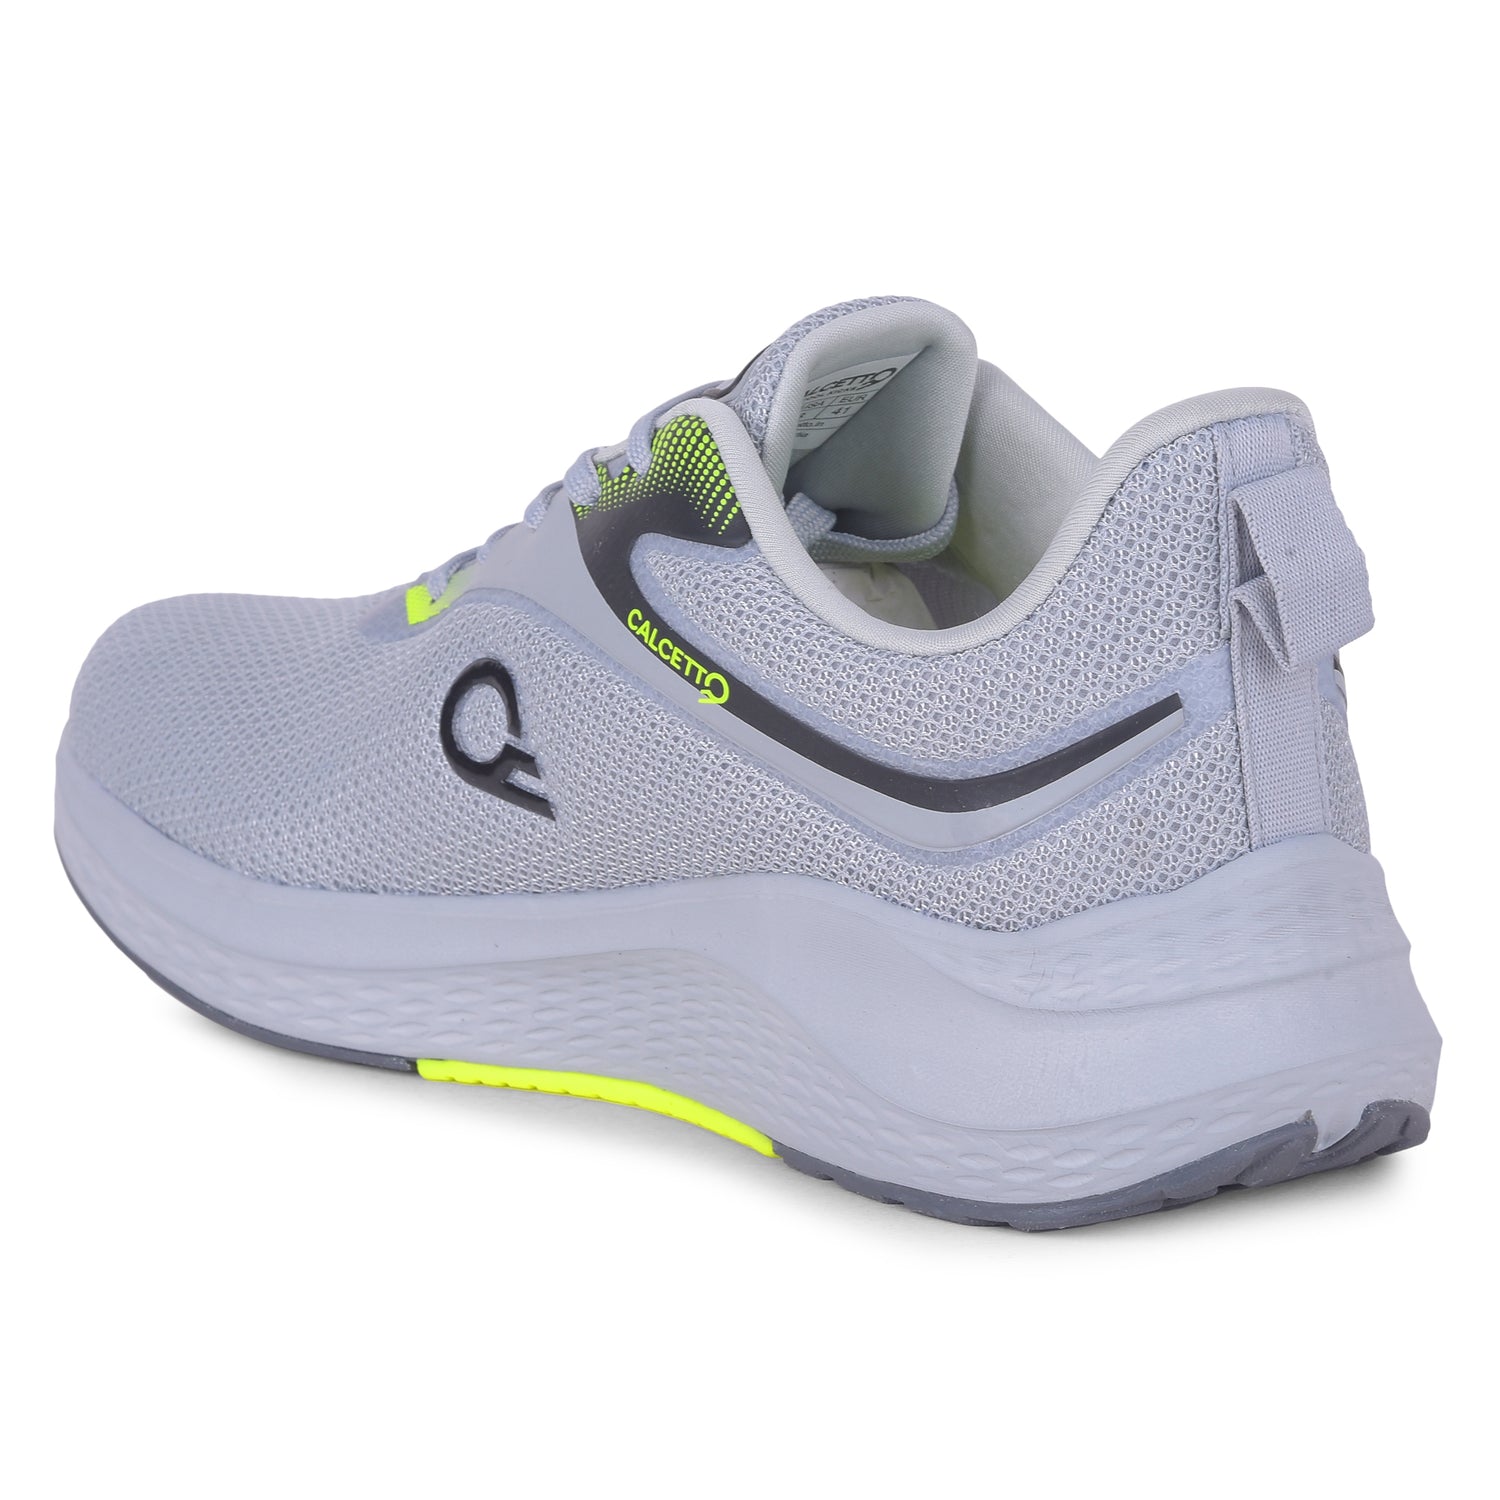 Calcetto CLT-2032 L Grey Lime Men Running Sports Shoe